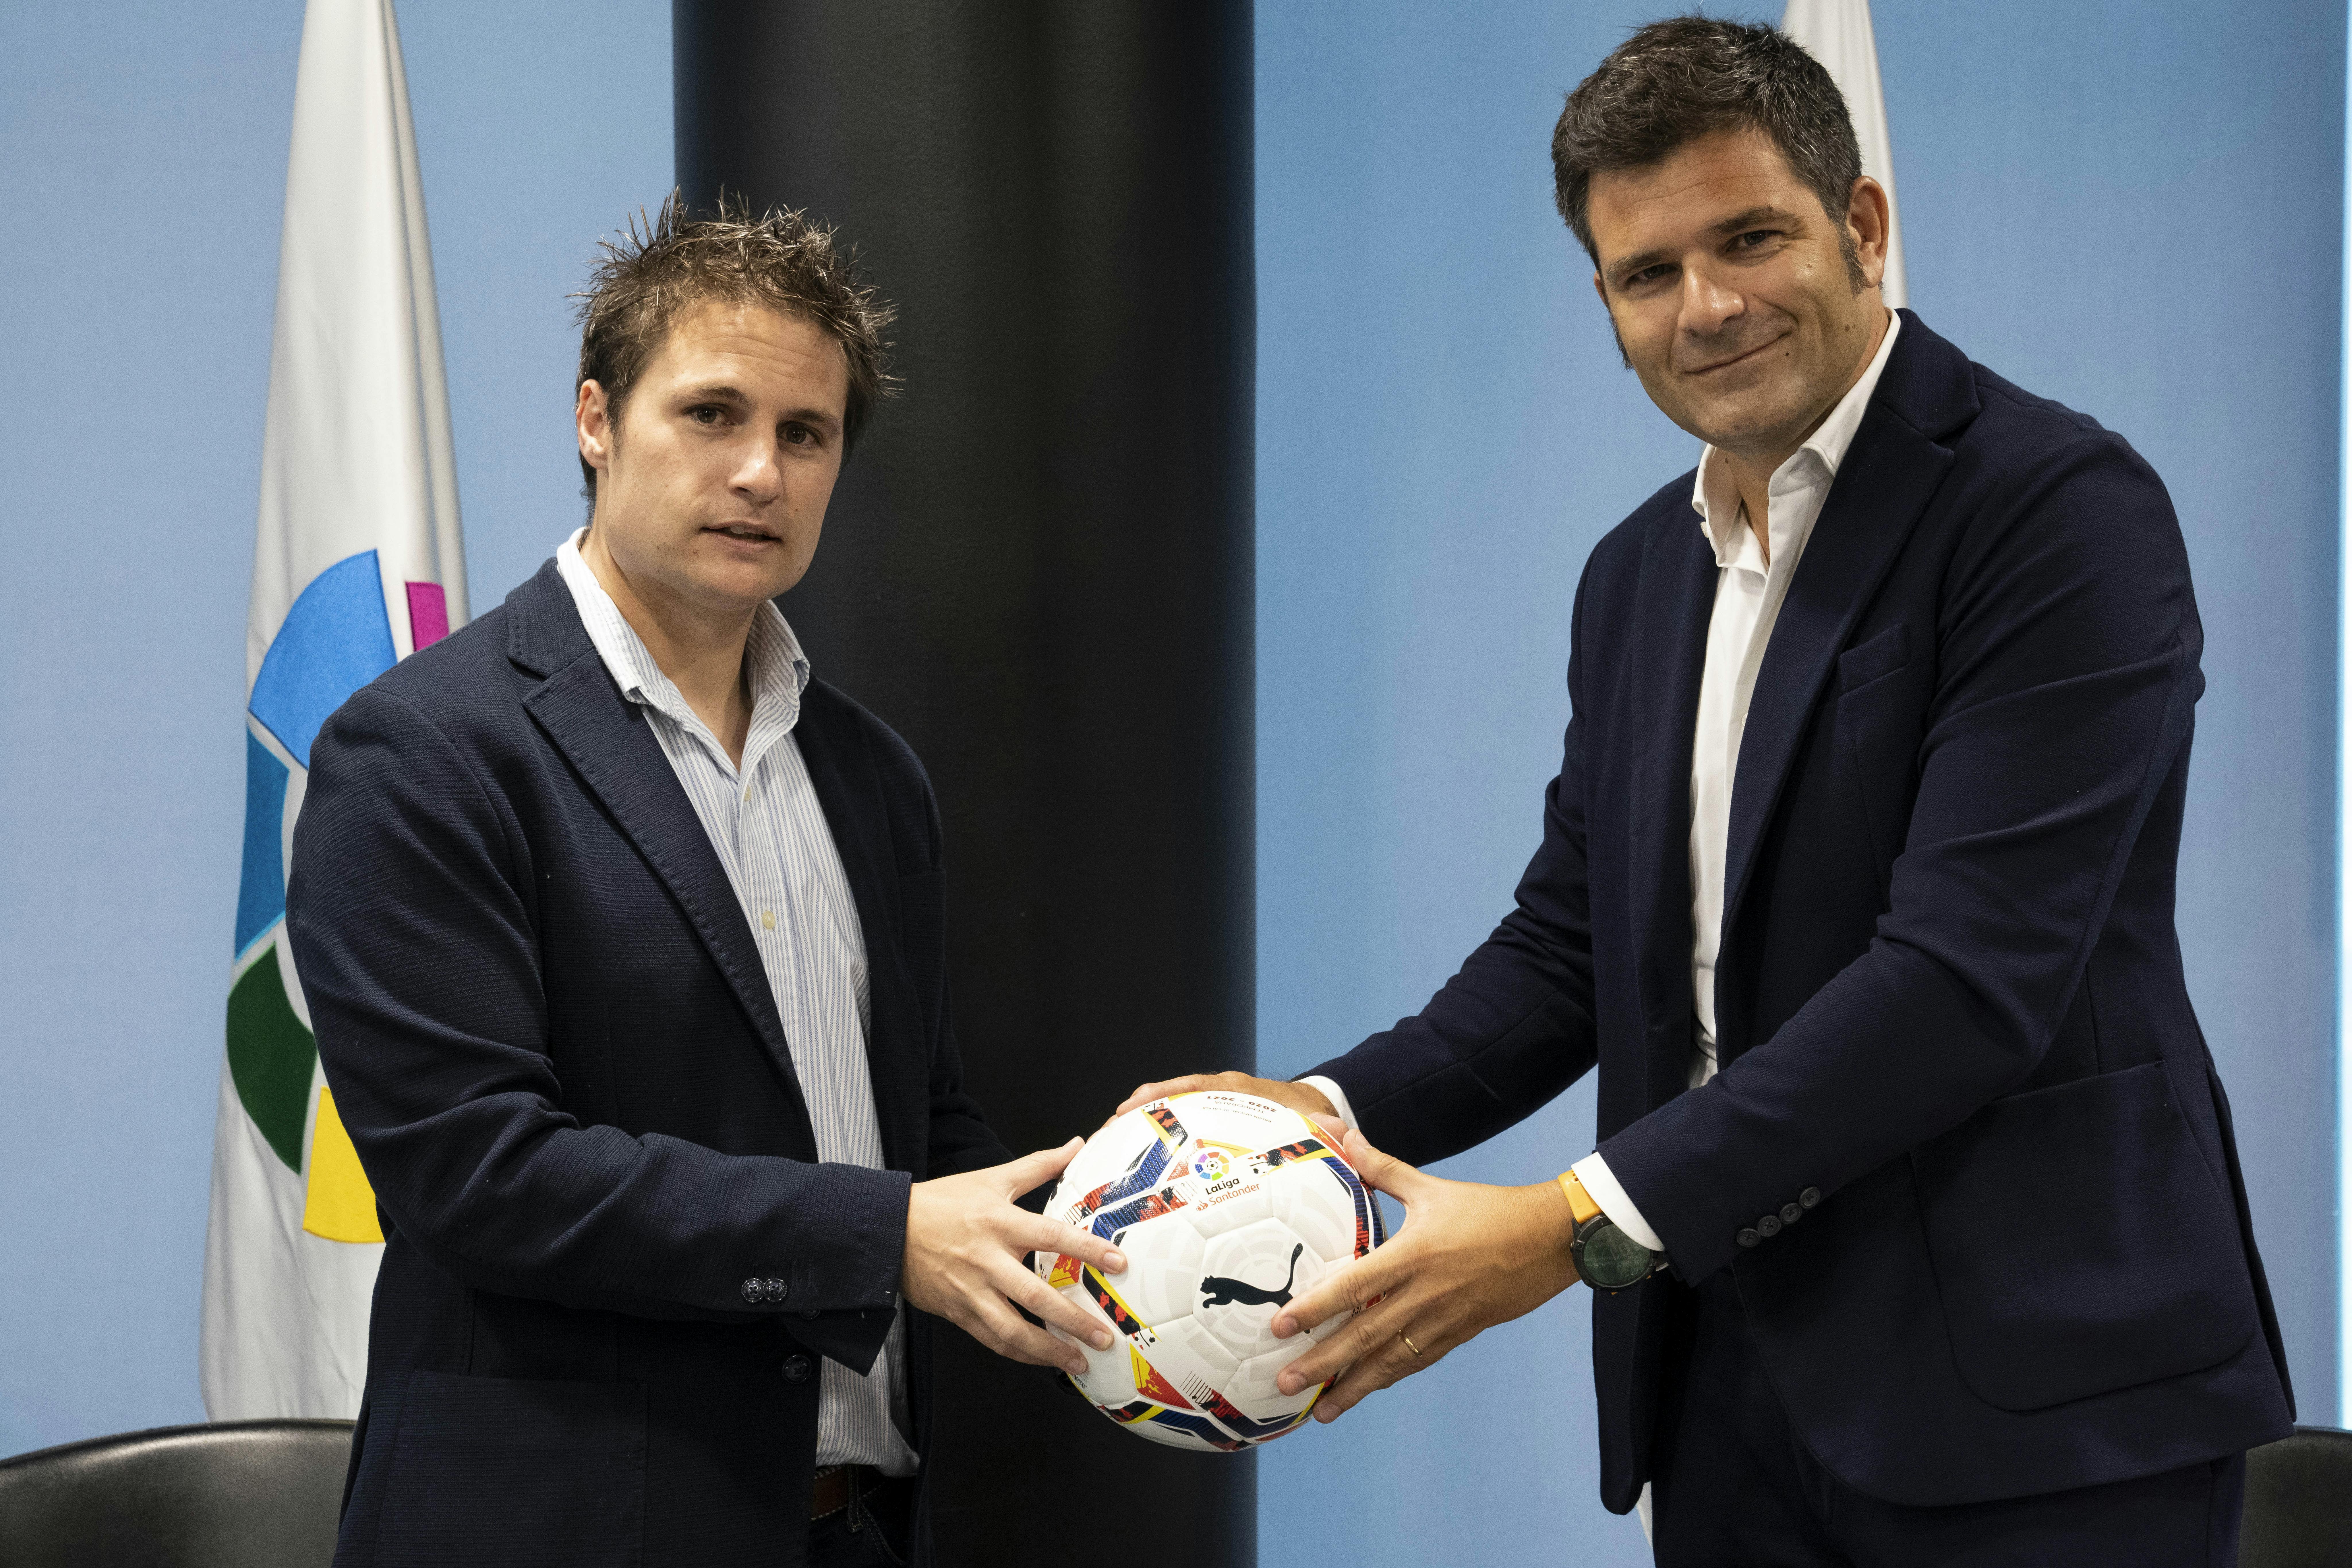 LaLiga and VRM team up to bring exclusive Spanish soccer experiences to China